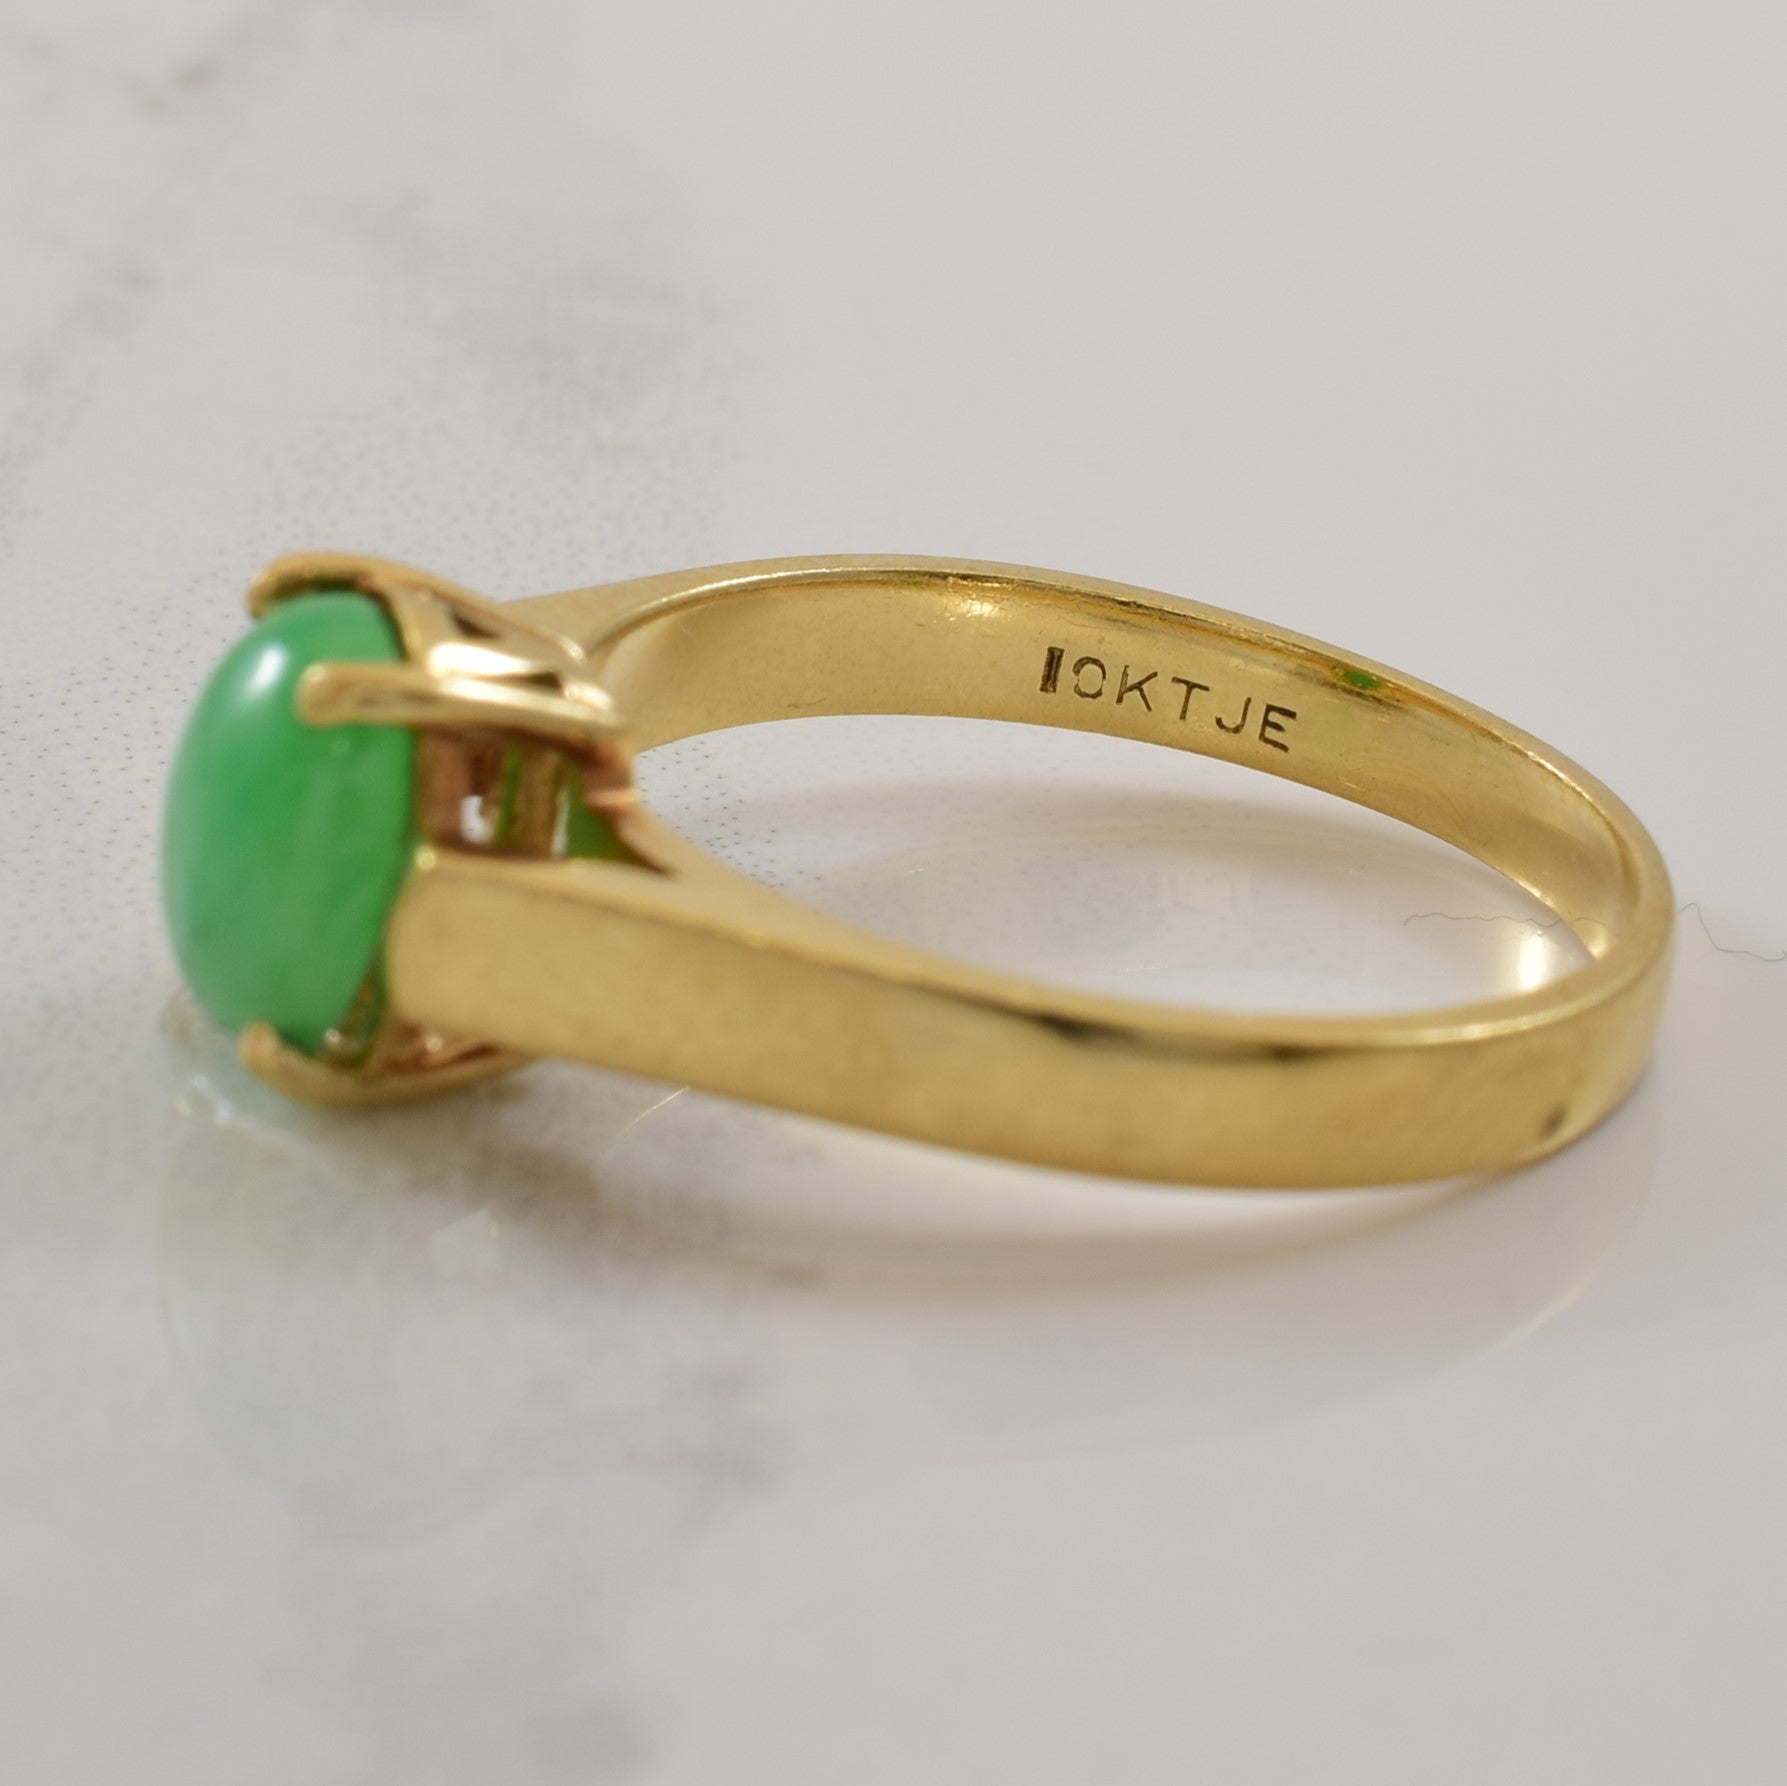 Nephrite Cabochon Solitaire Ring | 1.17ct | SZ 6.75 |